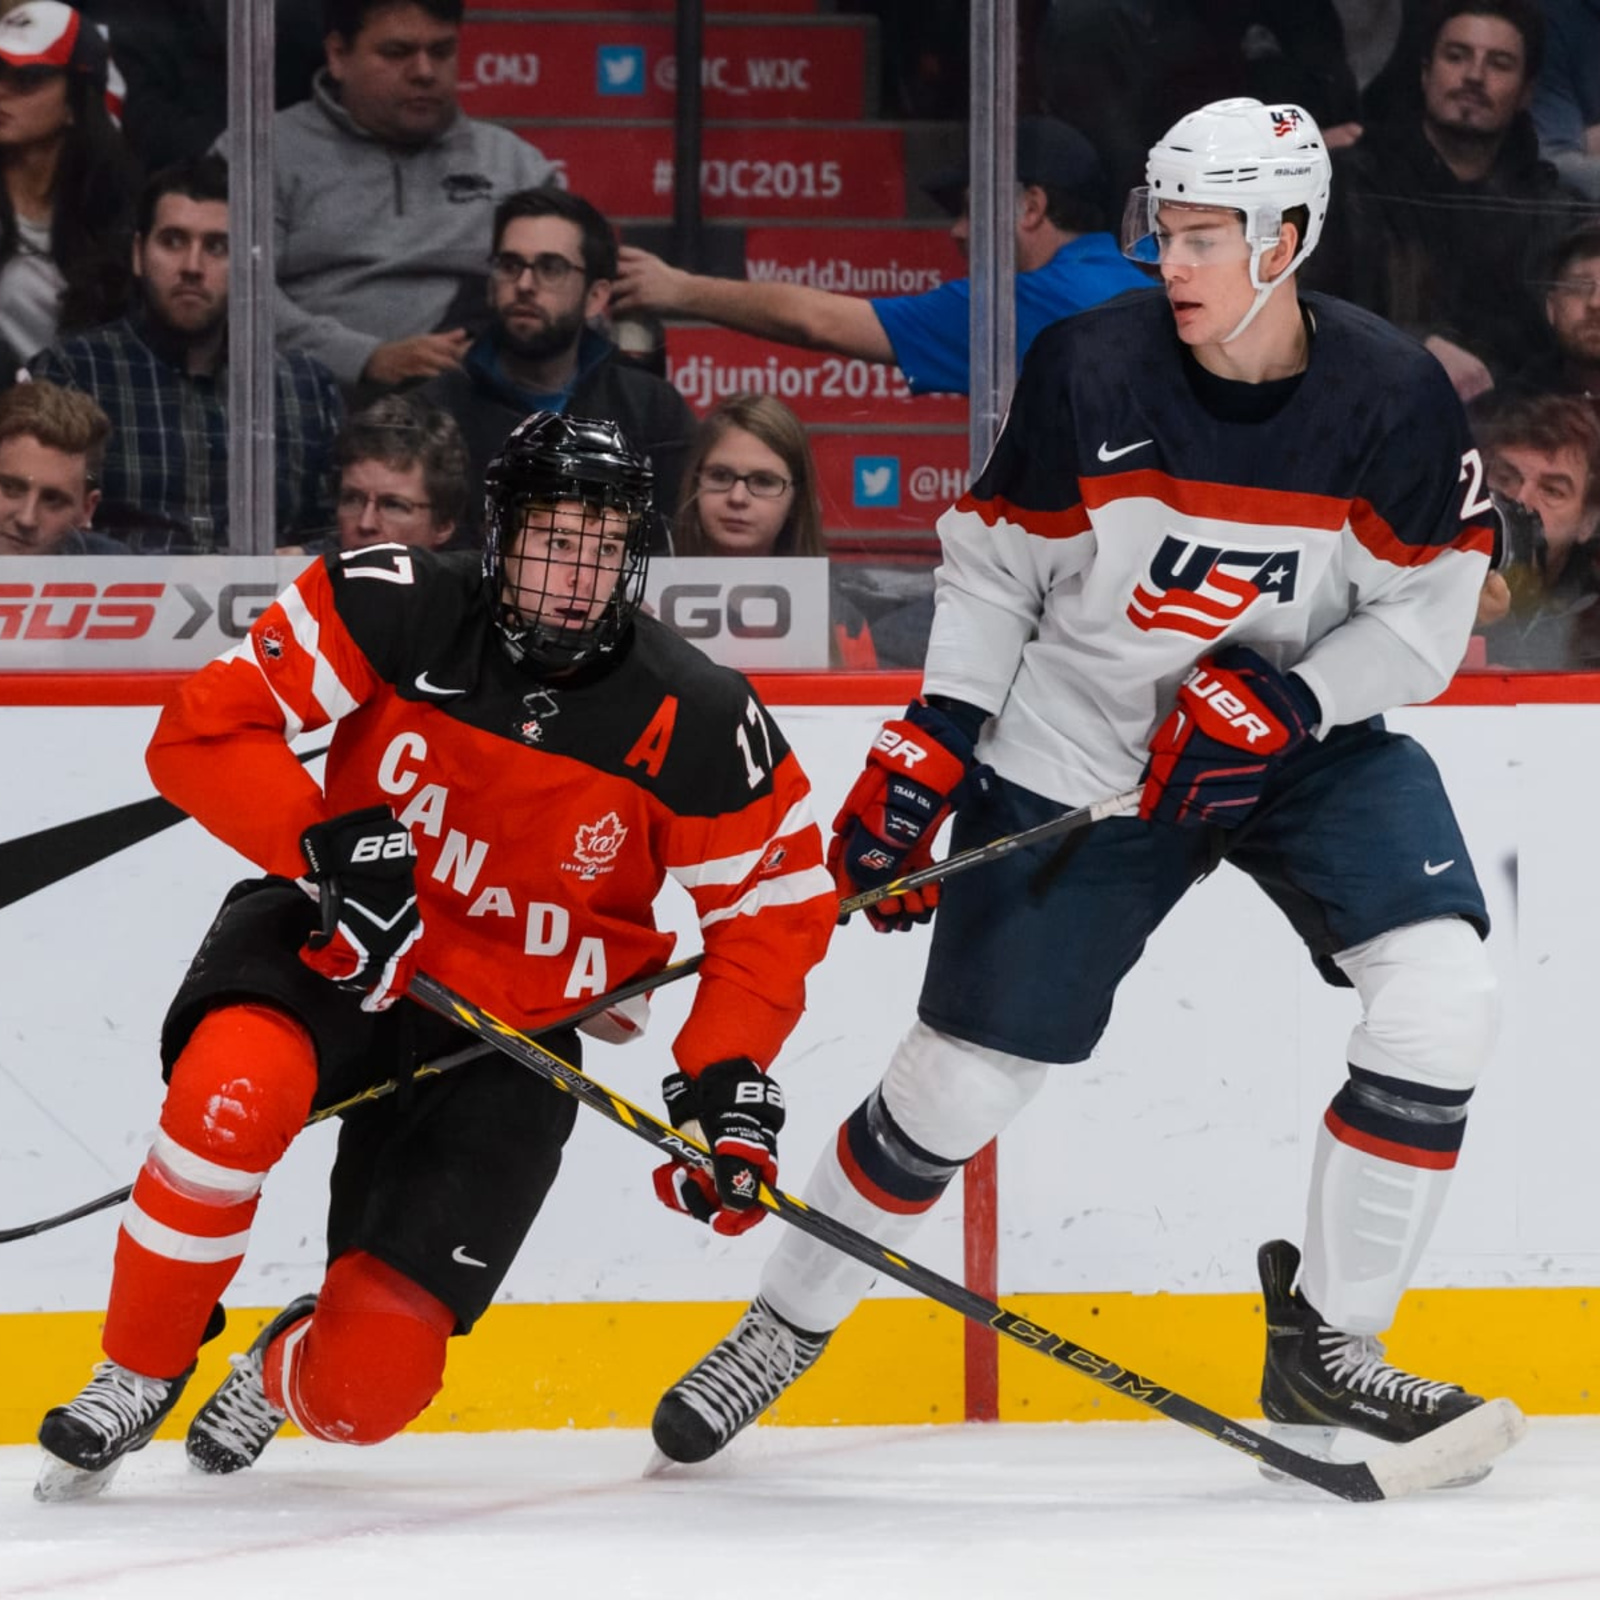 Top Prospects Take an Unconventional Path to the World Juniors